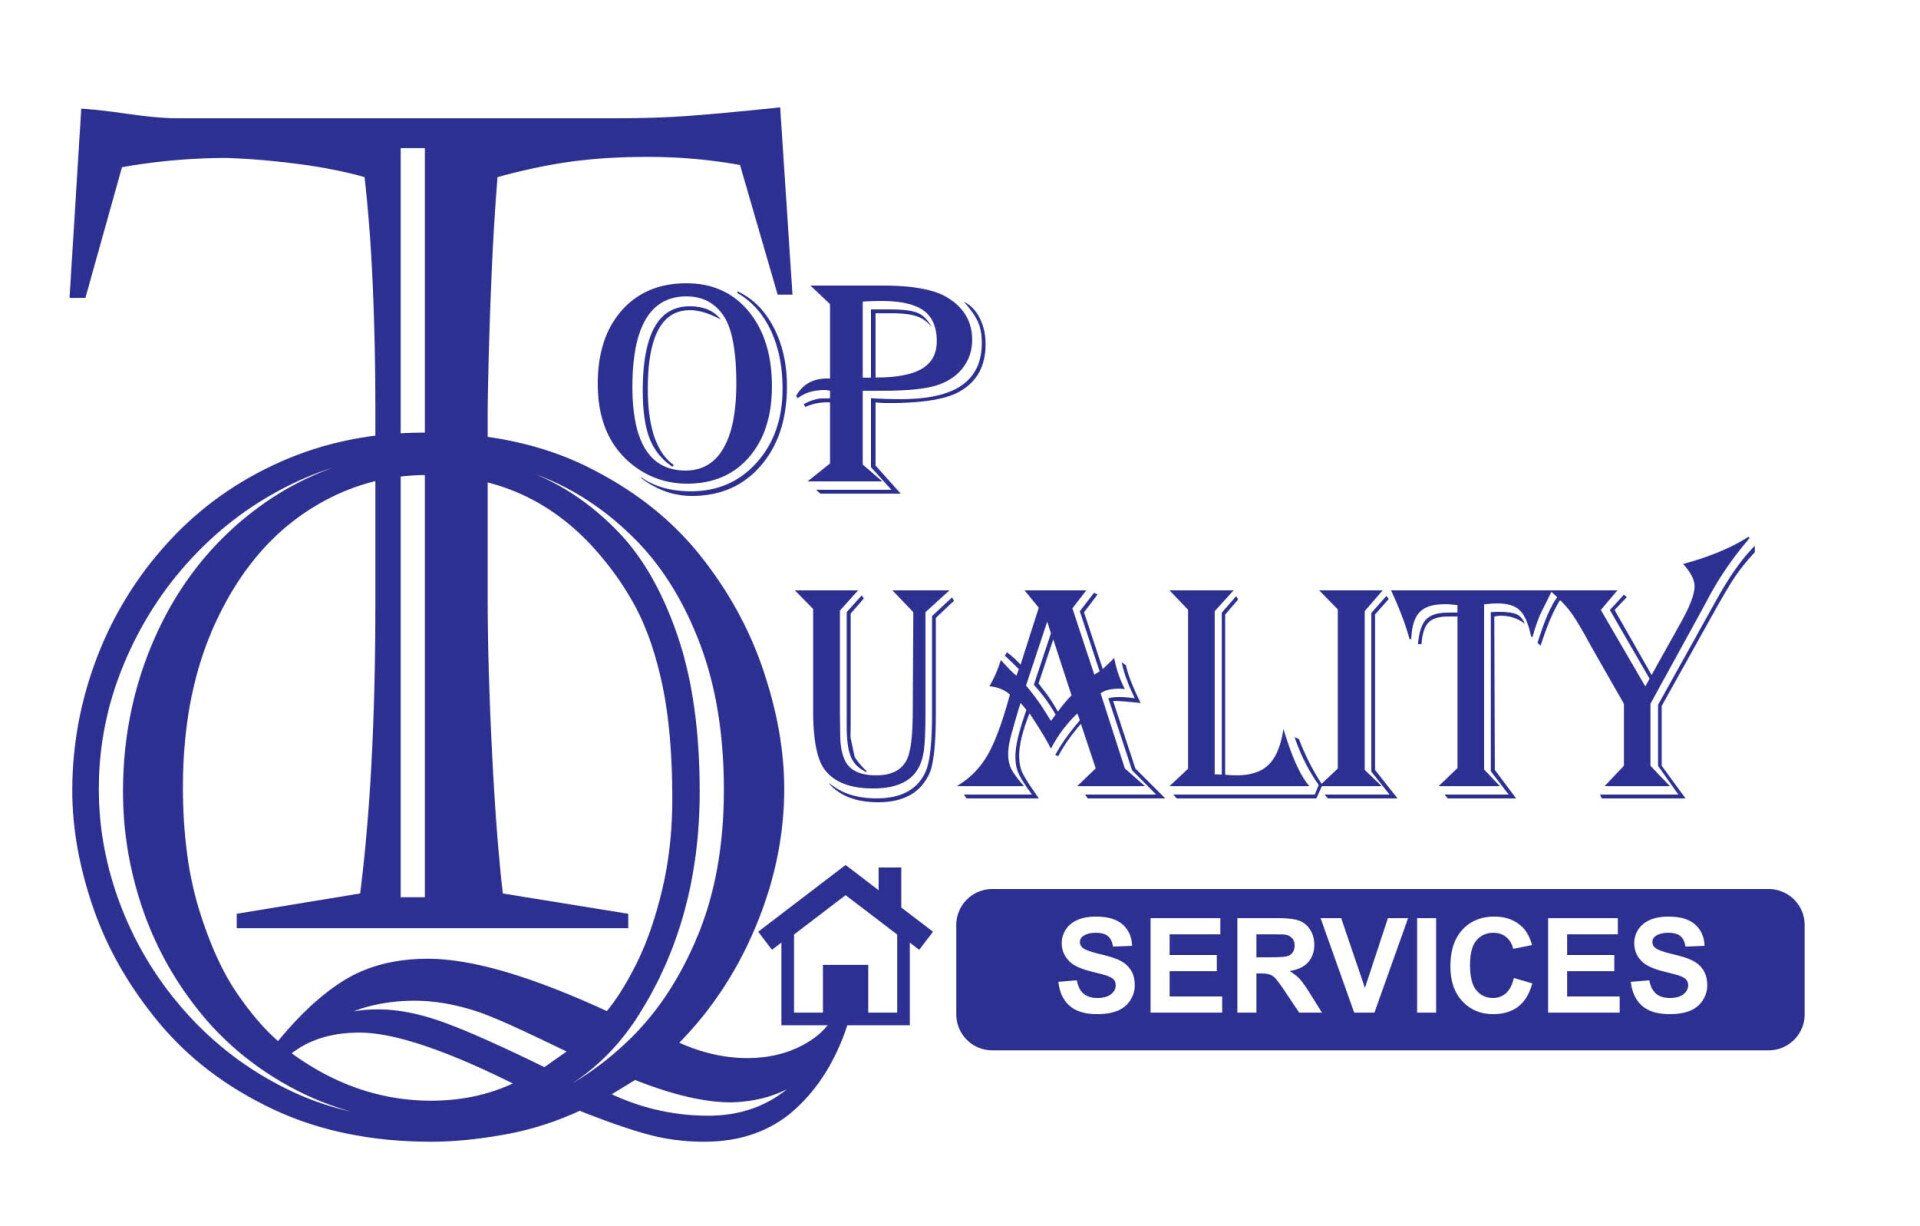 A blue and white logo for top quality services